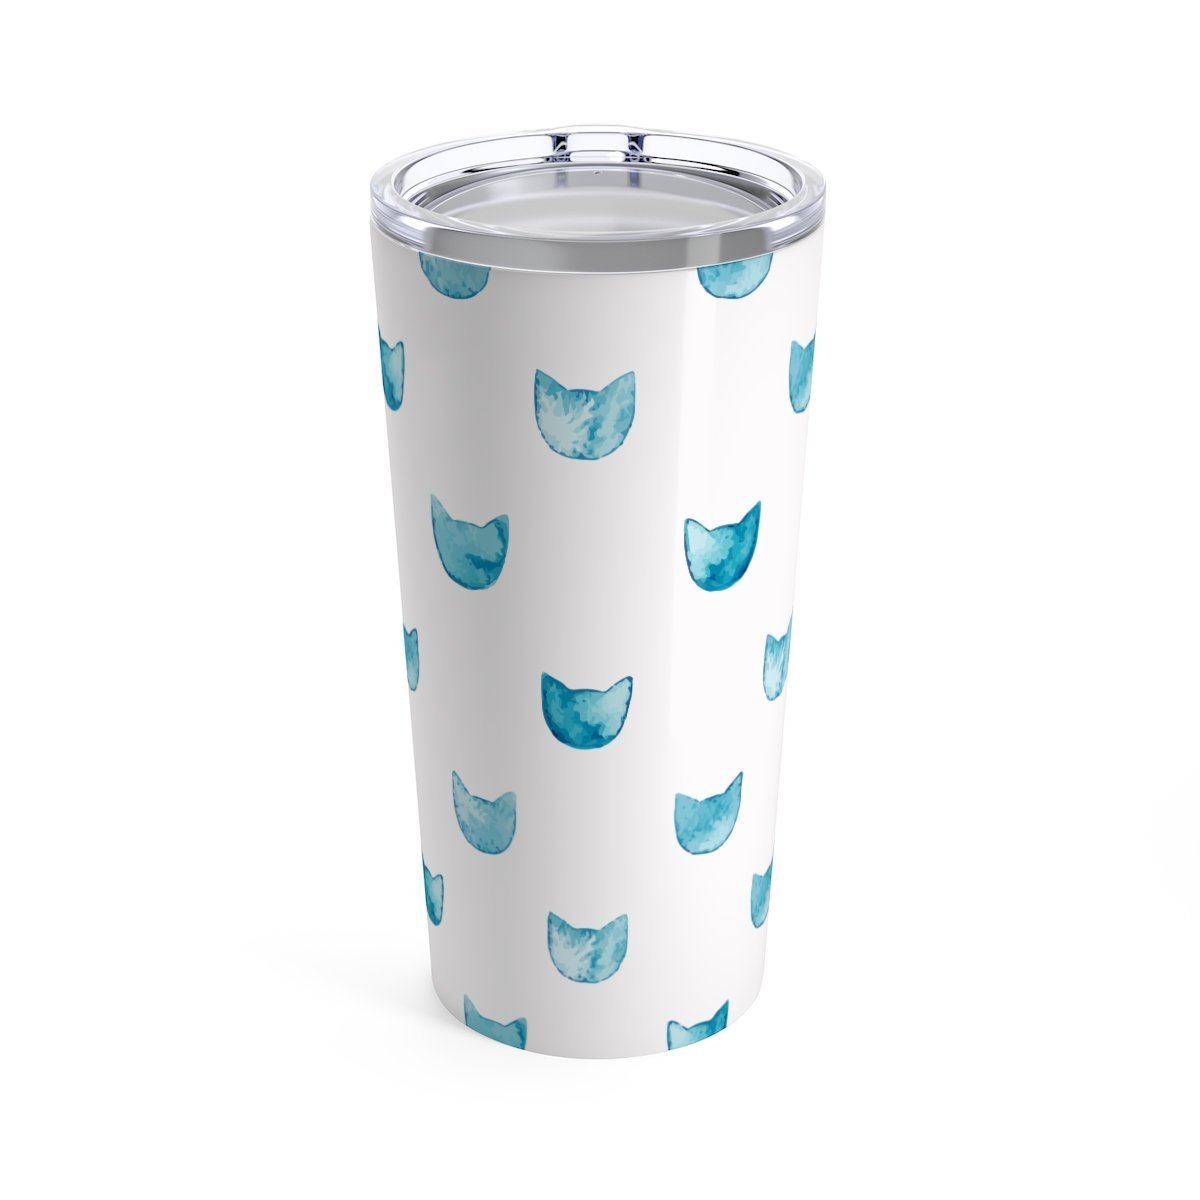 Unusual Gifts for Cat Lovers, Cat Tumbler Cup Featuring Blue Cat Faces Printed On a White Stainless Steel Background